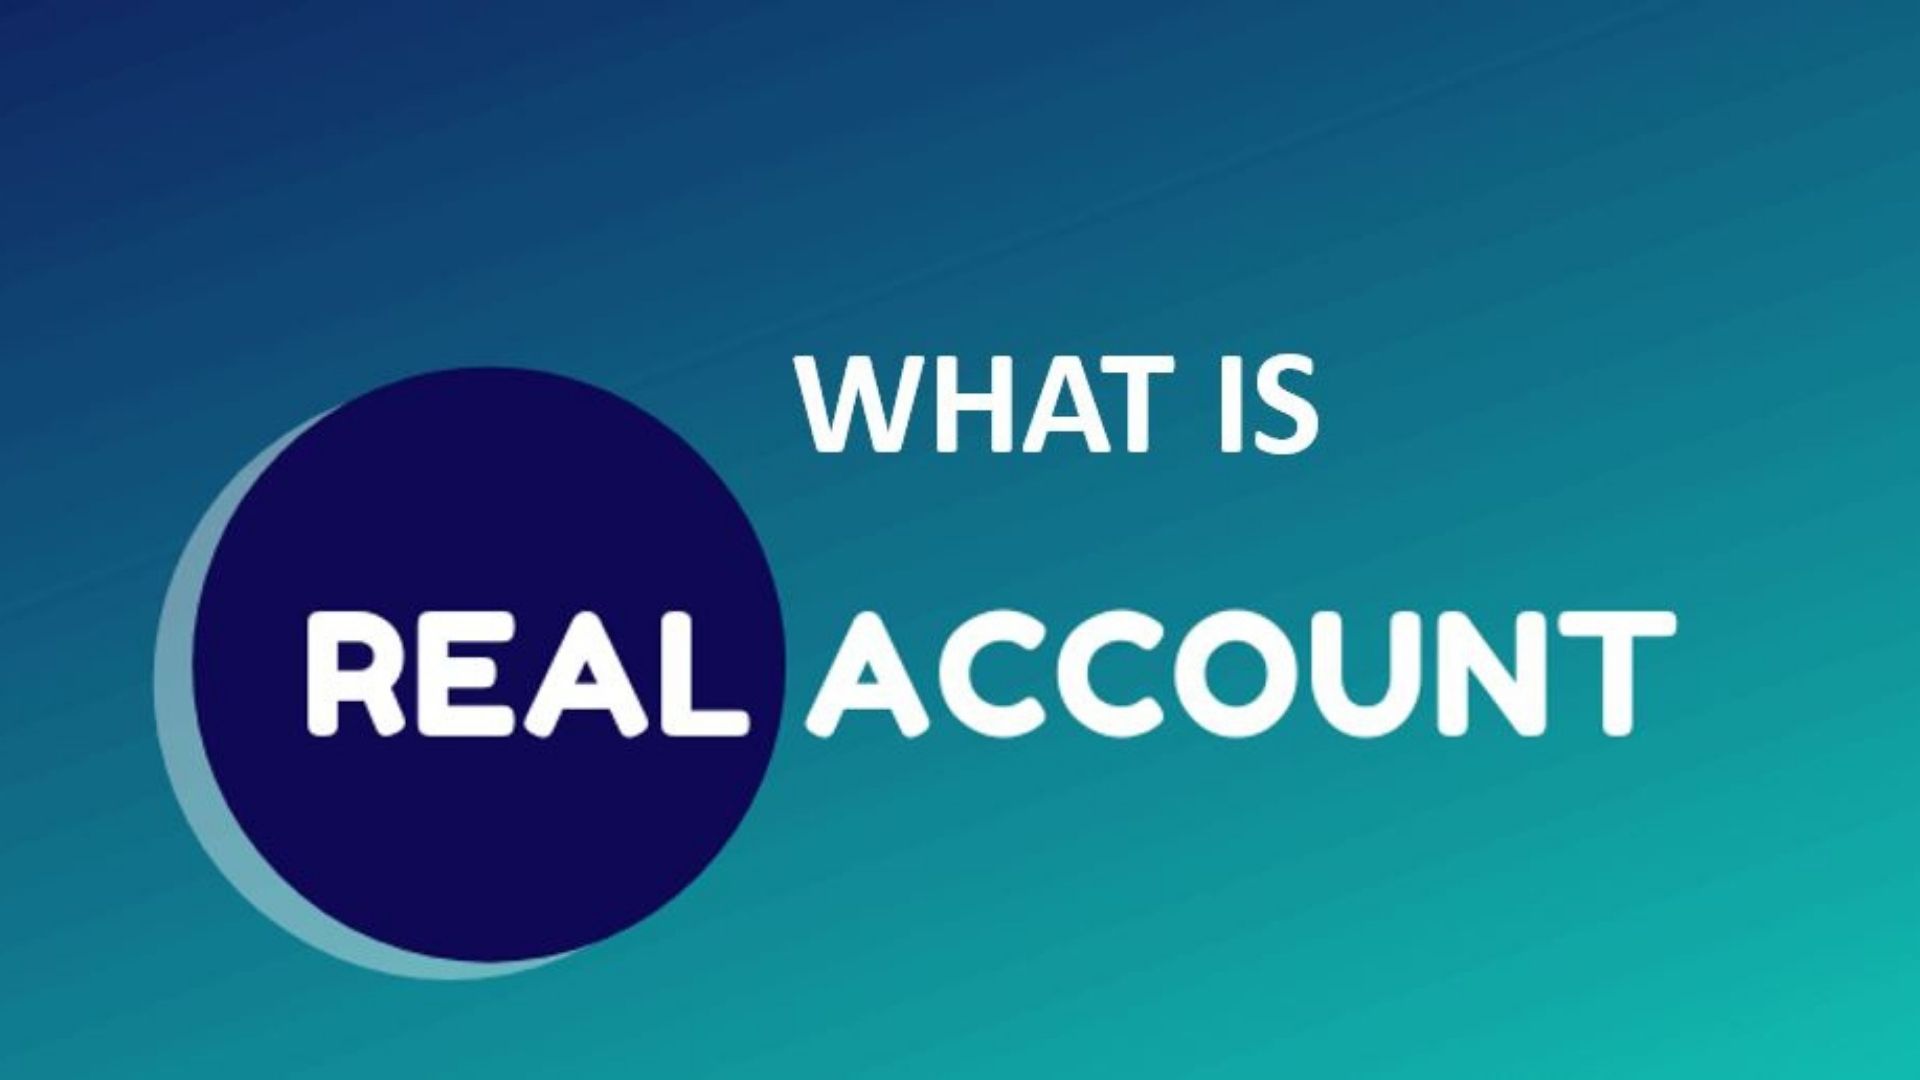 You are currently viewing What is a Real Account? Its Types, Advantages & Disadvantages (With FAQs)